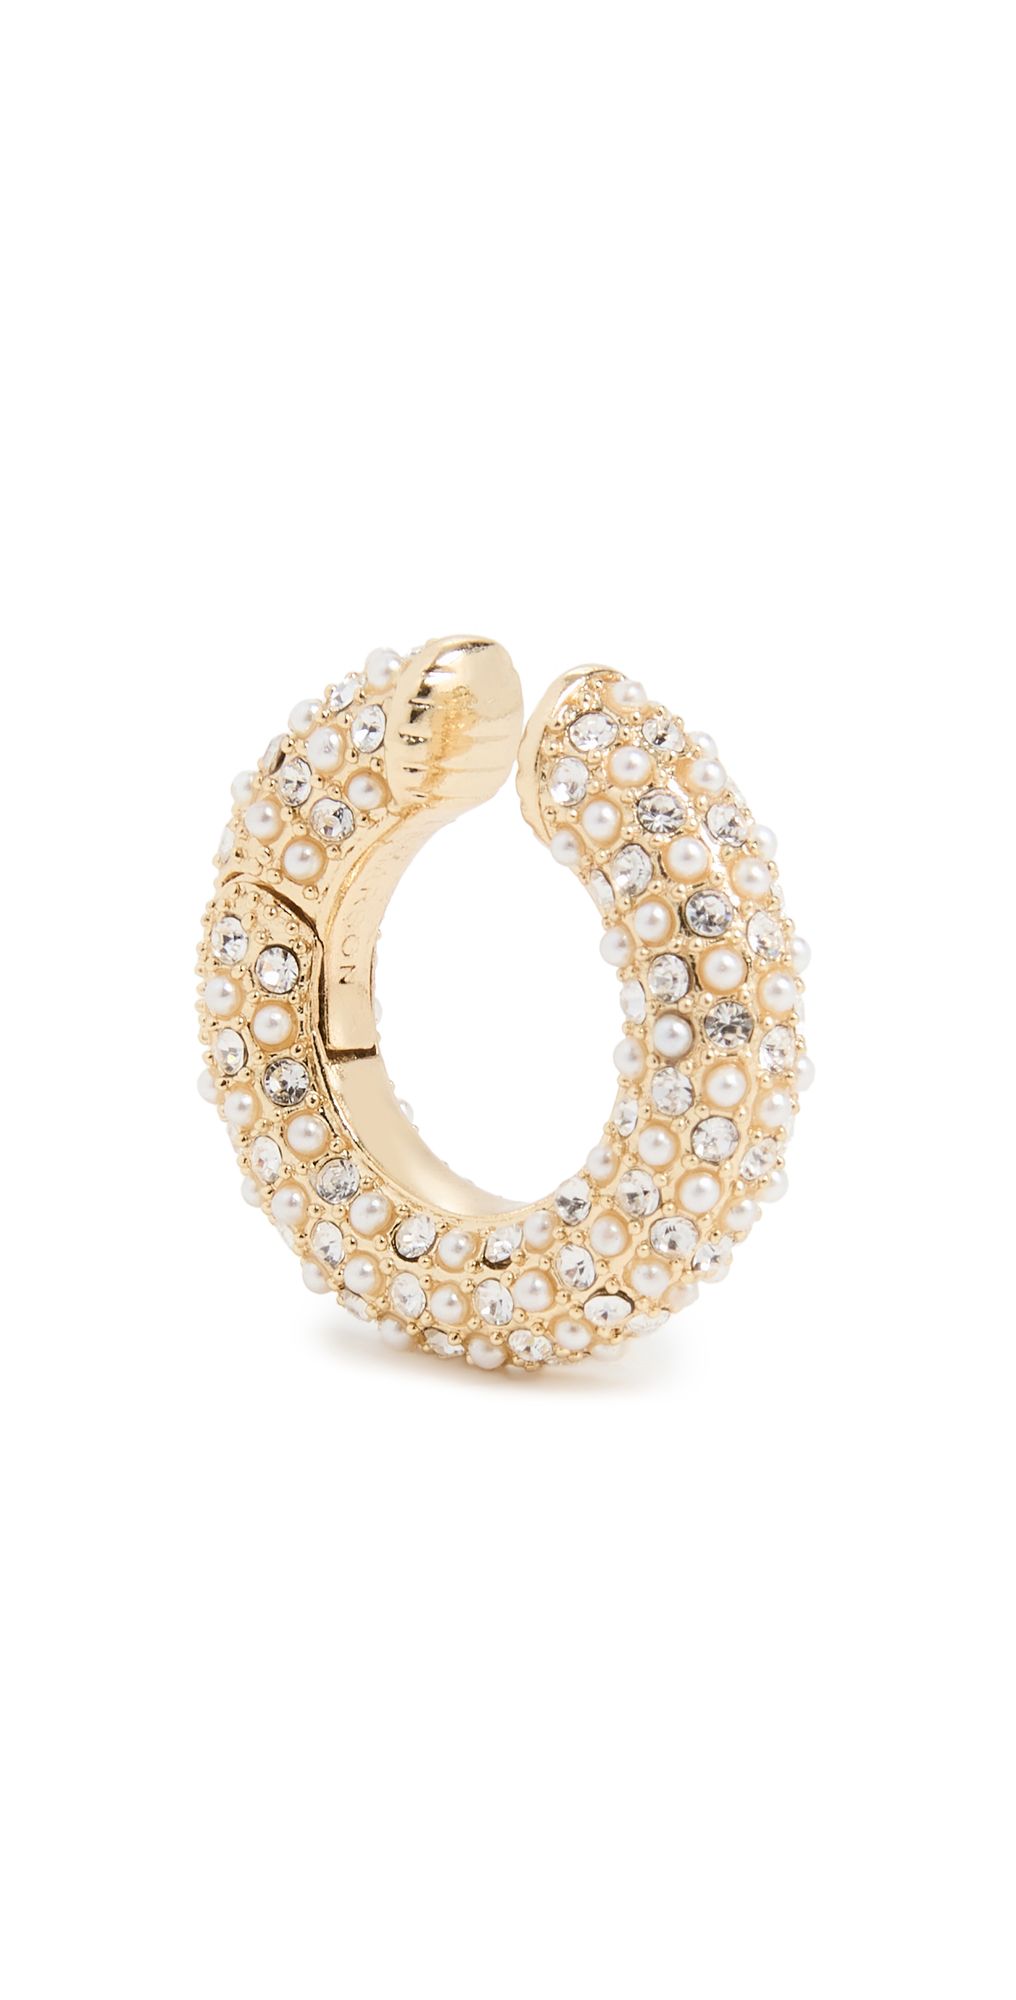 Pave Pearl Gaby Cuff | Shopbop